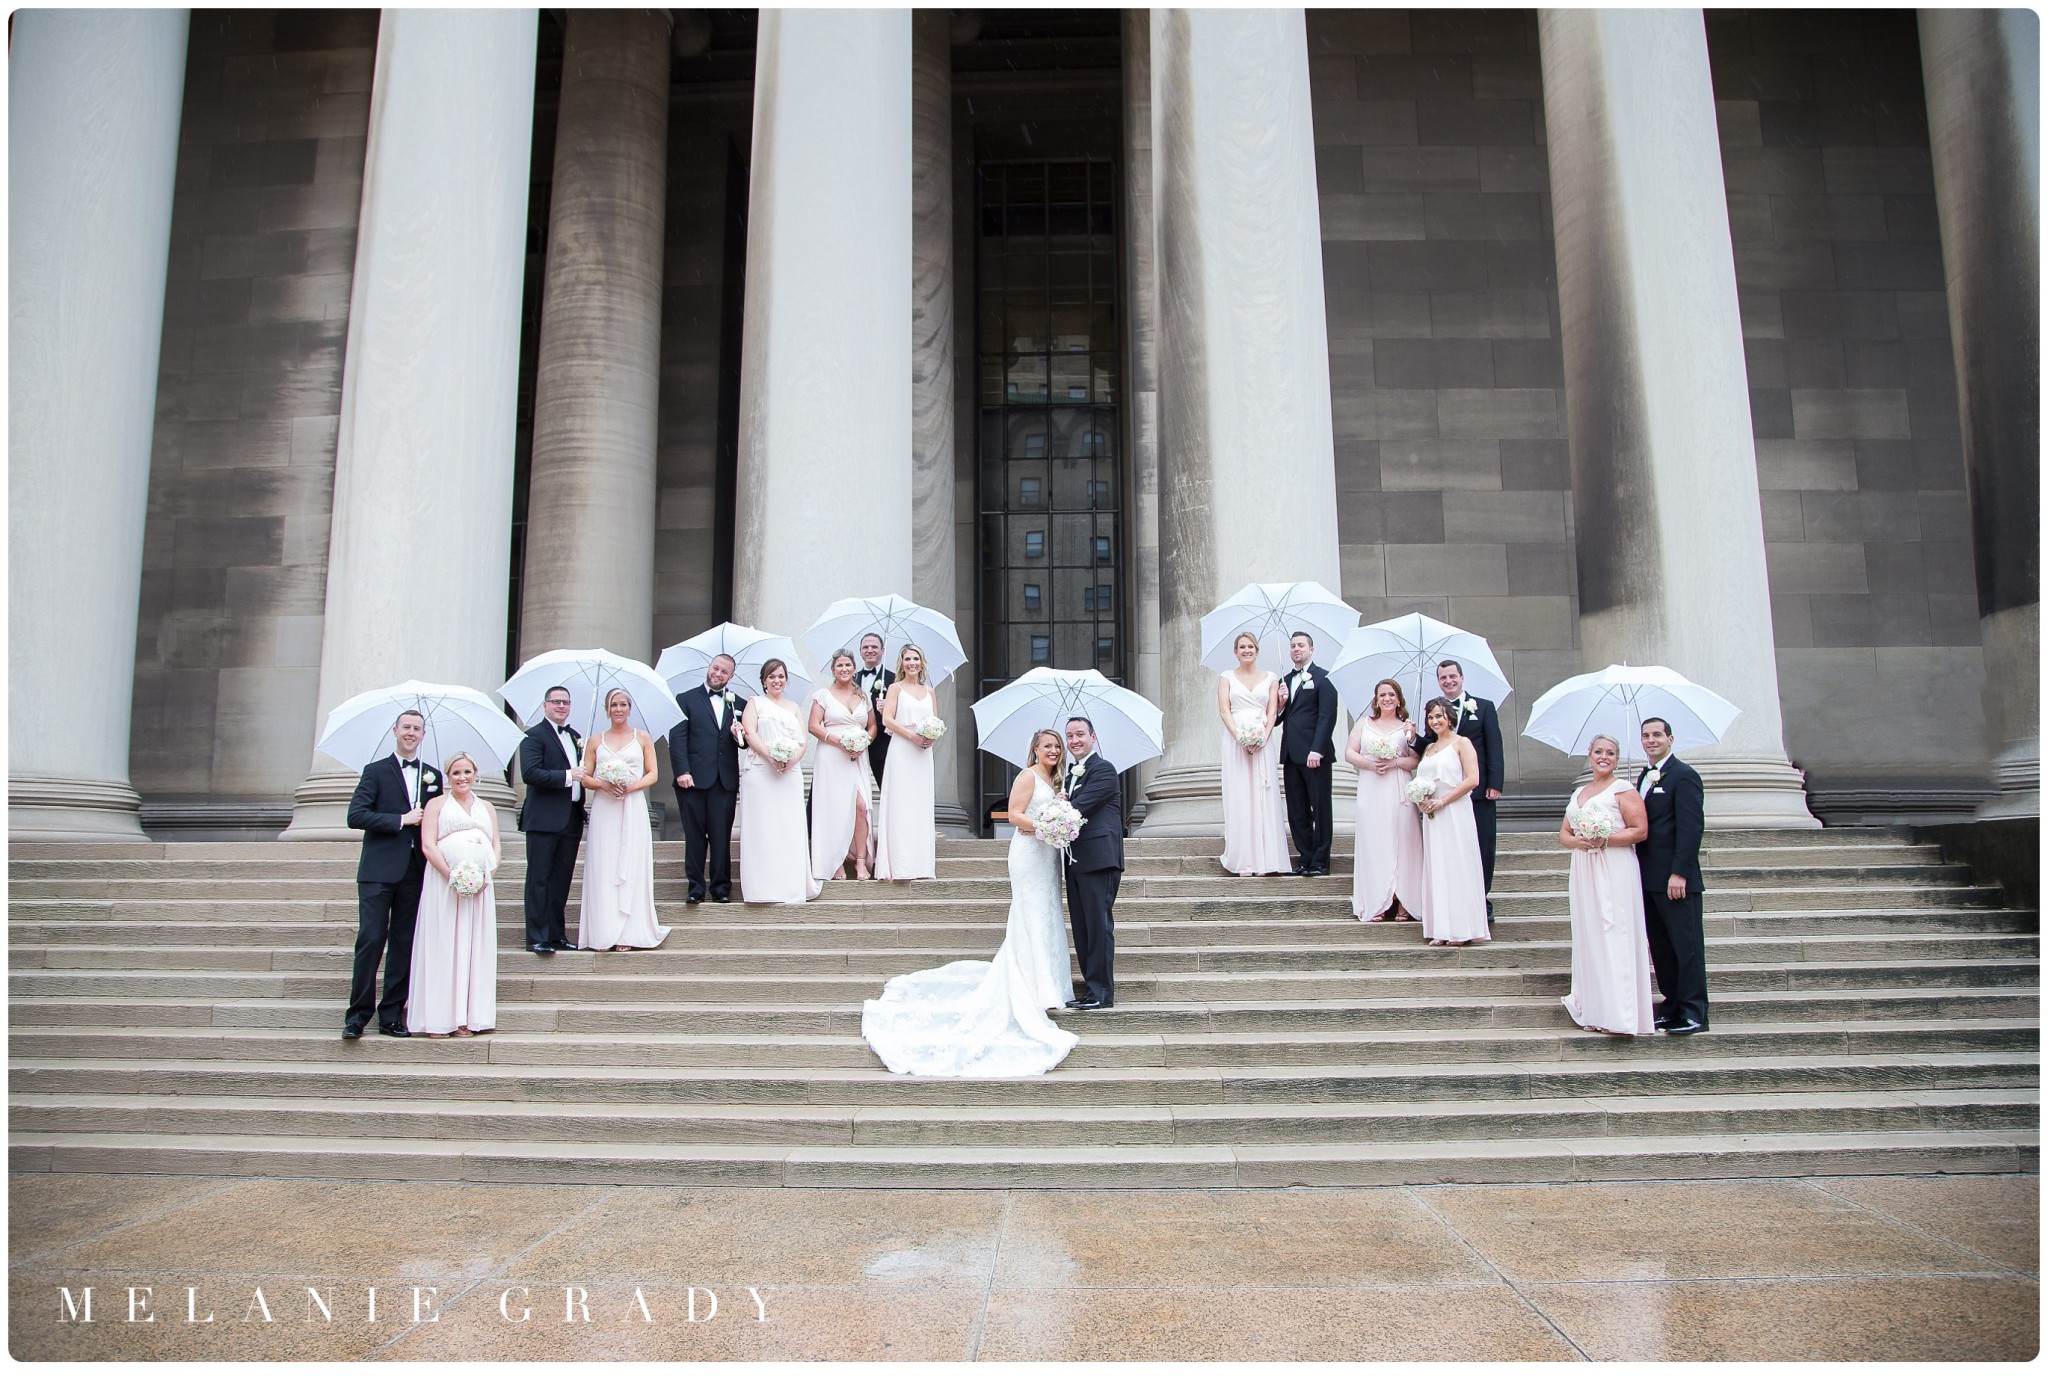 Carnegie Museum of Natural History Wedding, bridal portraits at the Mellon Institute columns, Rainy bridal party portraits, white golf umbrellas in wedding, blush bridesmaids dresses, black tux, bride and groom, grand stairs, nashville's premier wedding photographer, Melanie Grady, also travels for destination weddings all over the USA